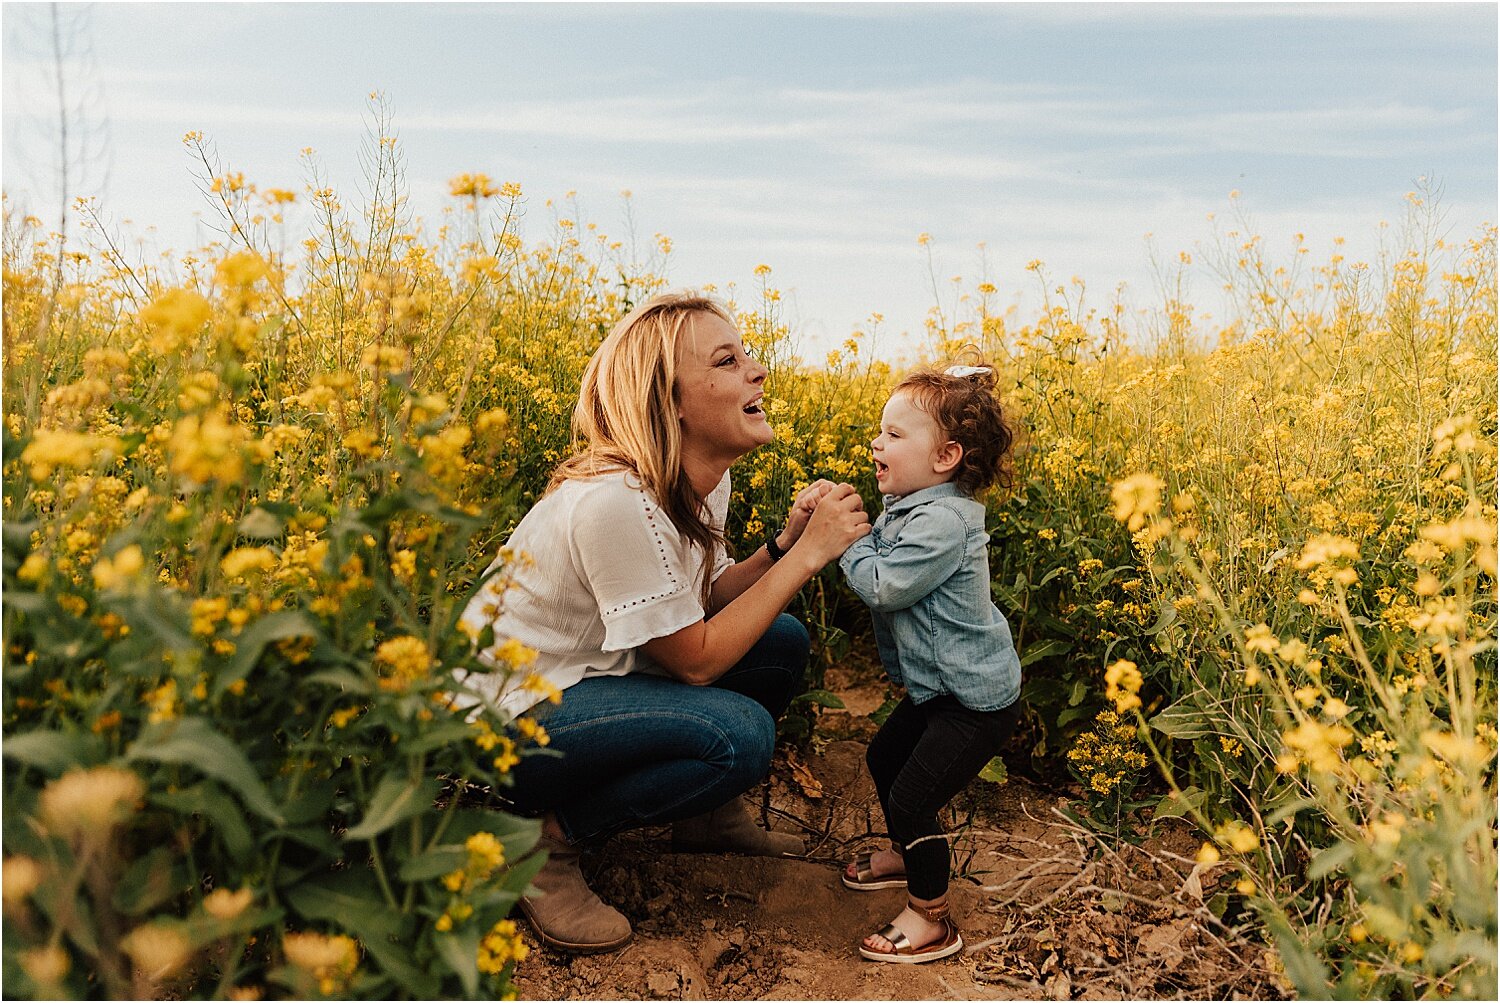 spring field of yellow flowers family session26.jpg